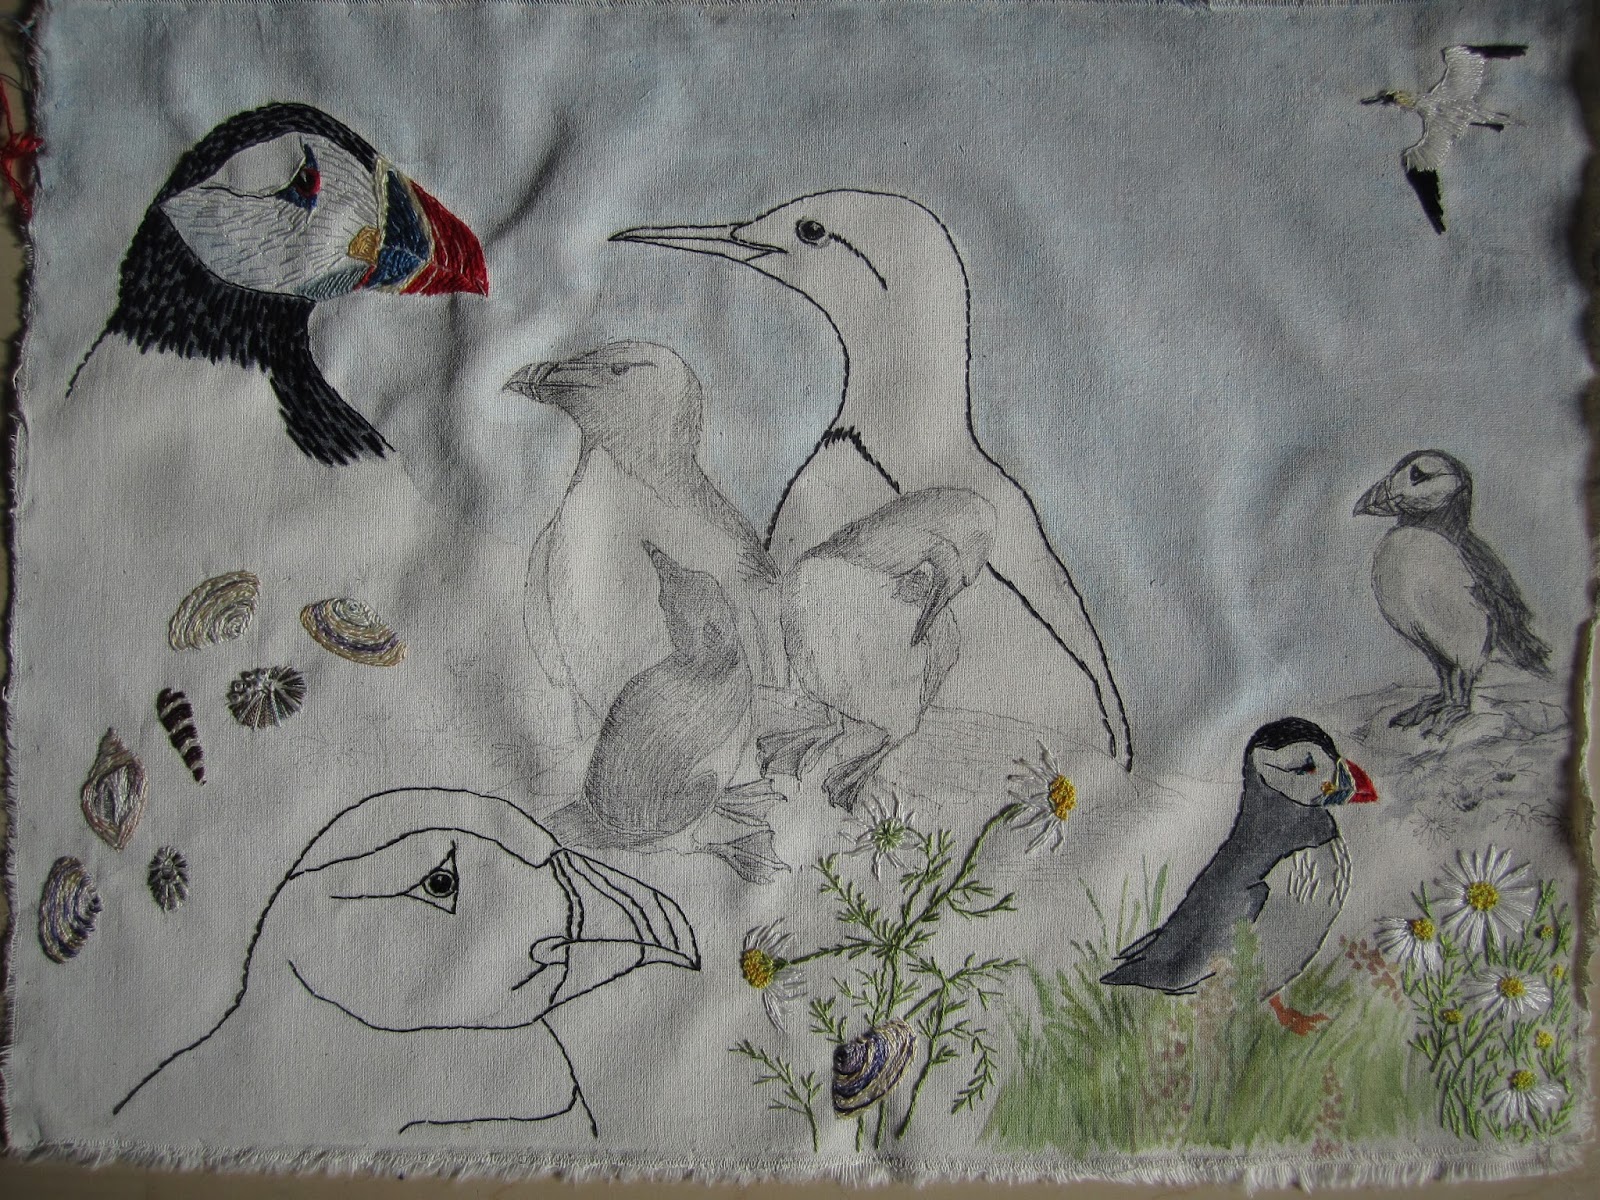 Louise Watson - Textile Artist: Summer cloth - slow stitching and hand  embroidery.